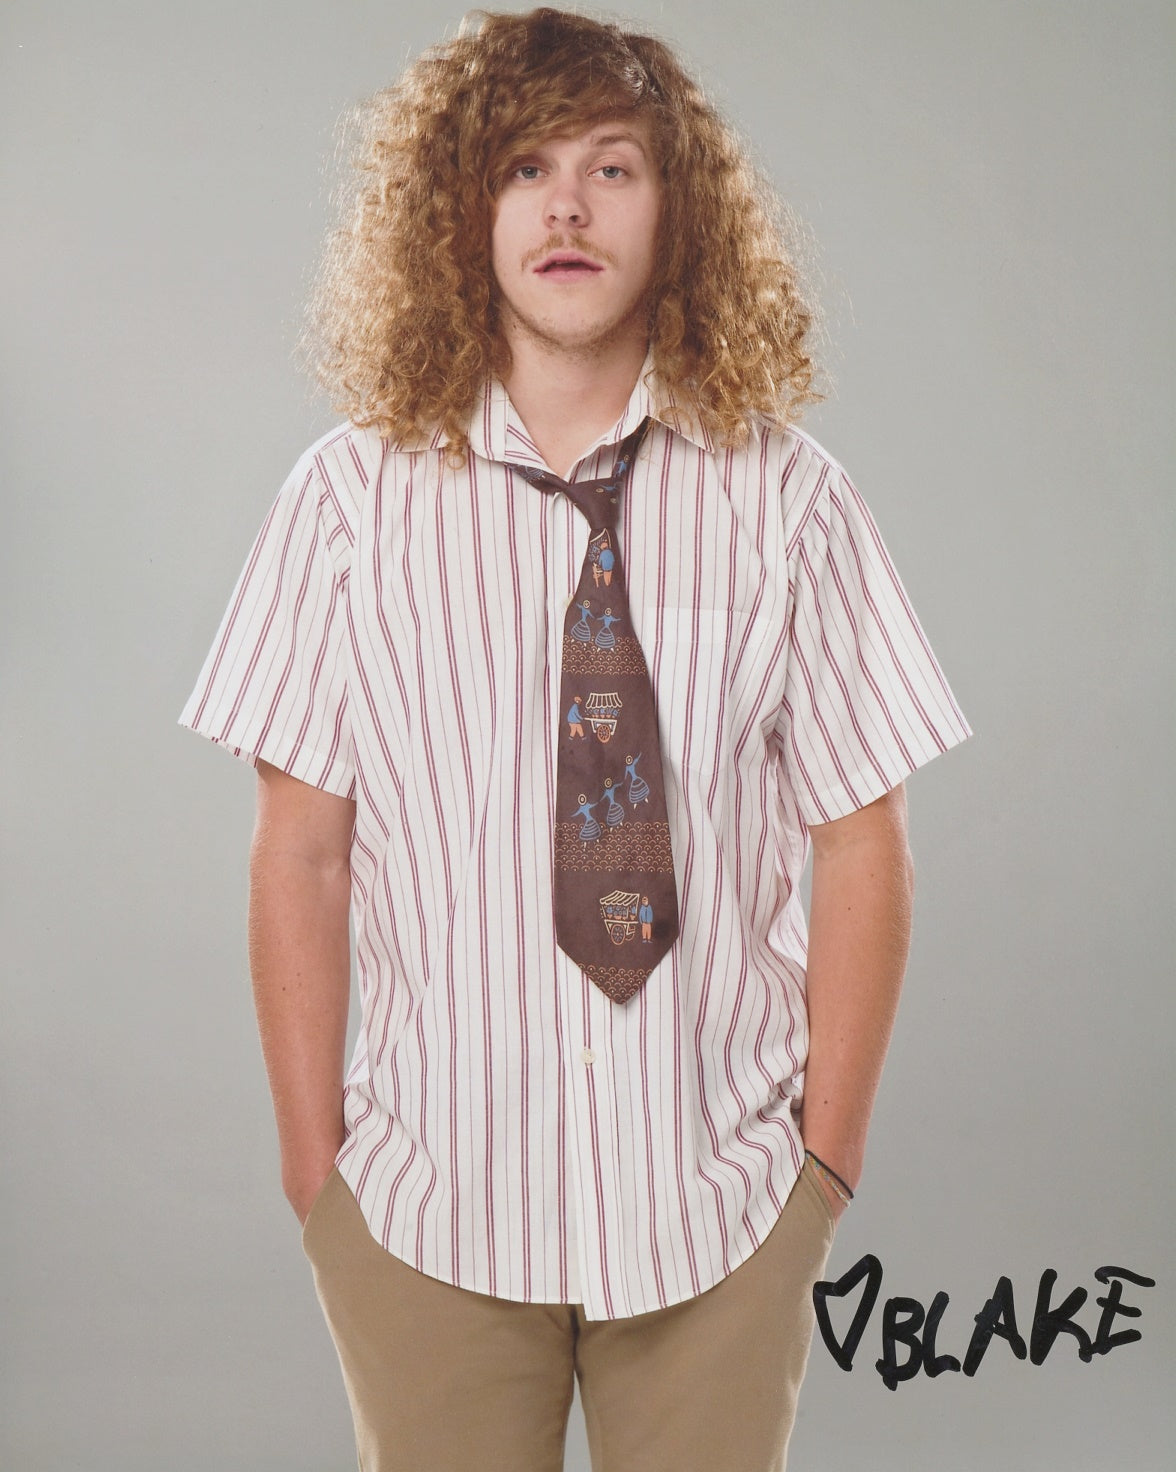 Blake Anderson Signed 8x10 Photo - Video Proof